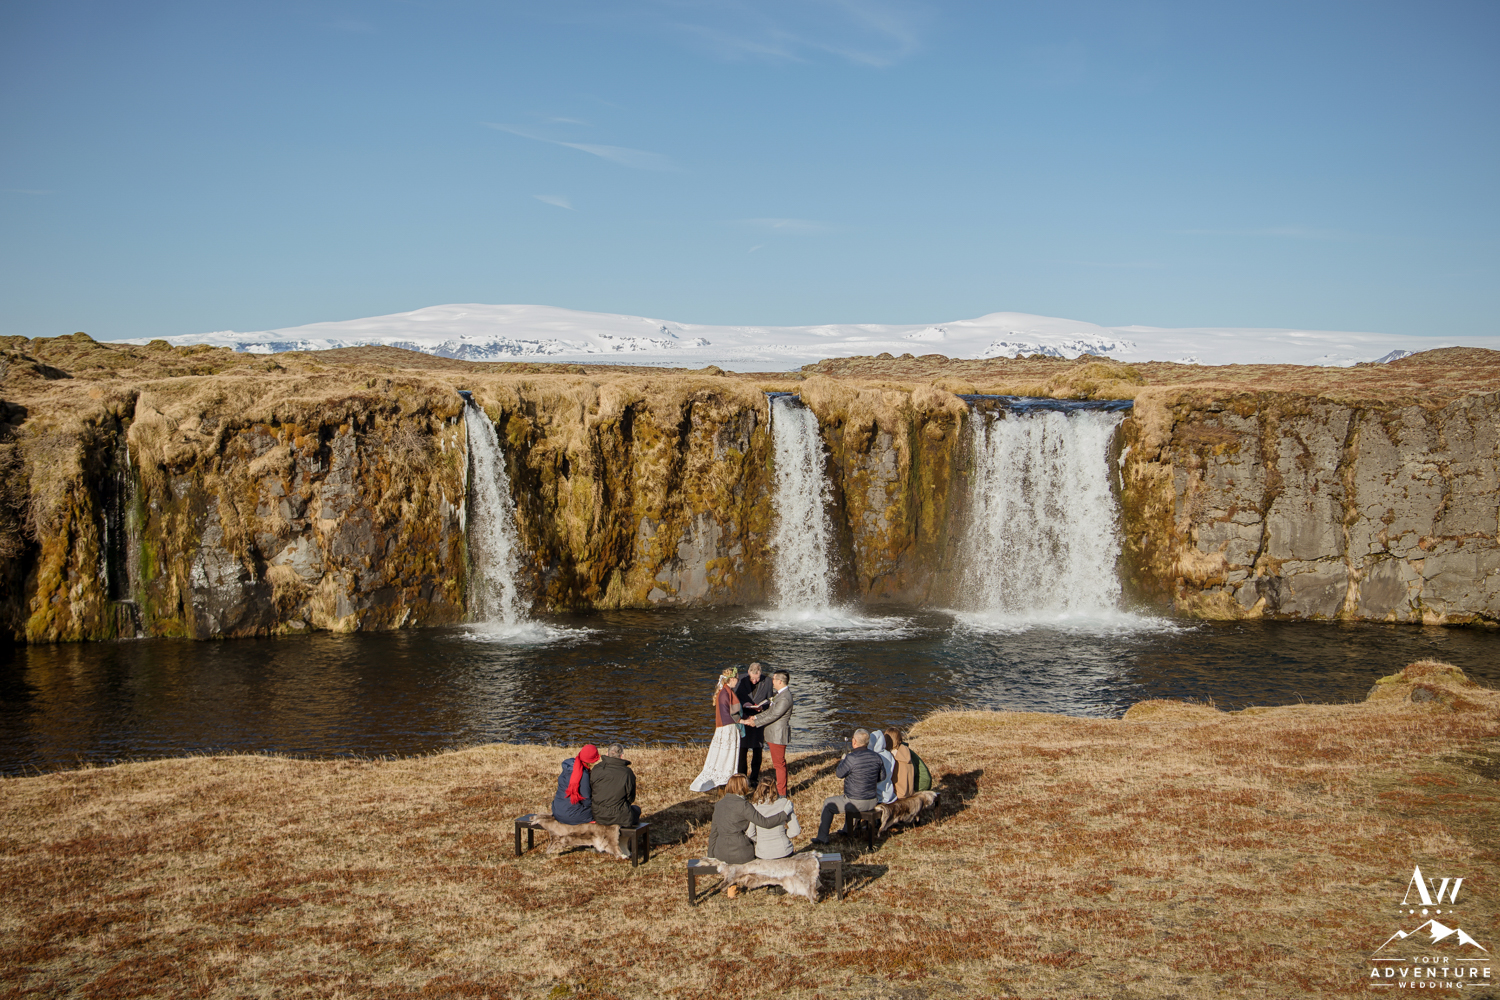 Private Waterfall Wedding Ceremony in Iceland